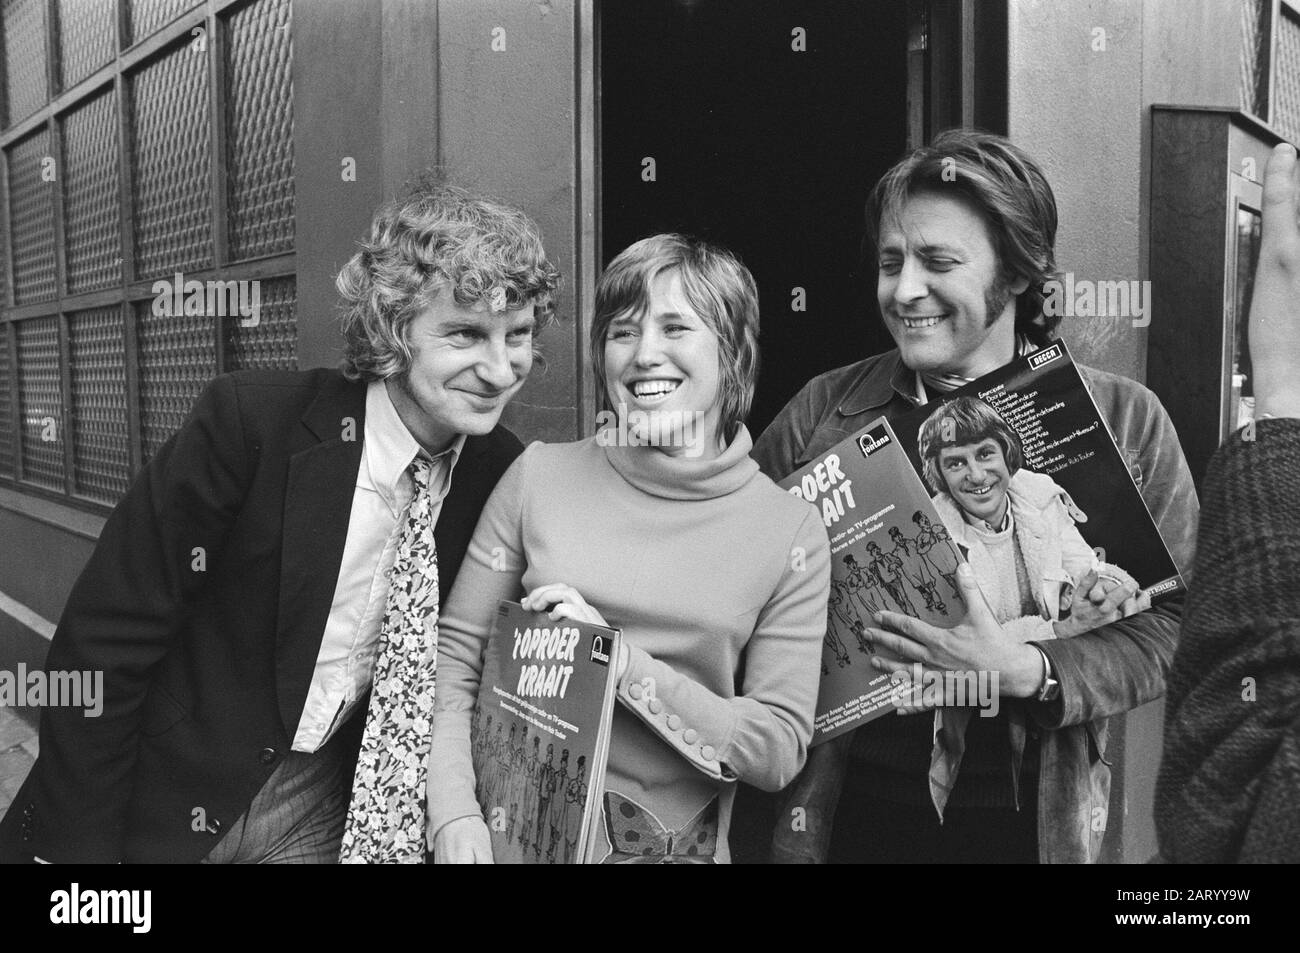 New album by Gerard Cox ('Wie points Gerard Cox de road') and Jaap van de Merwe ('Riot crow') in Amsterdam  V.l.n.r. Gerard Cox, Jenny Arean and Rob Touber, on the right the arm of Jaap van de Merwe Date: 30 March 1971 Location: Amsterdam, Noord-Holland Keywords: gramophone records, musicians, singers Personal name: Arean, Jenny, Cox, Gerard, Touber, Rob Stock Photo